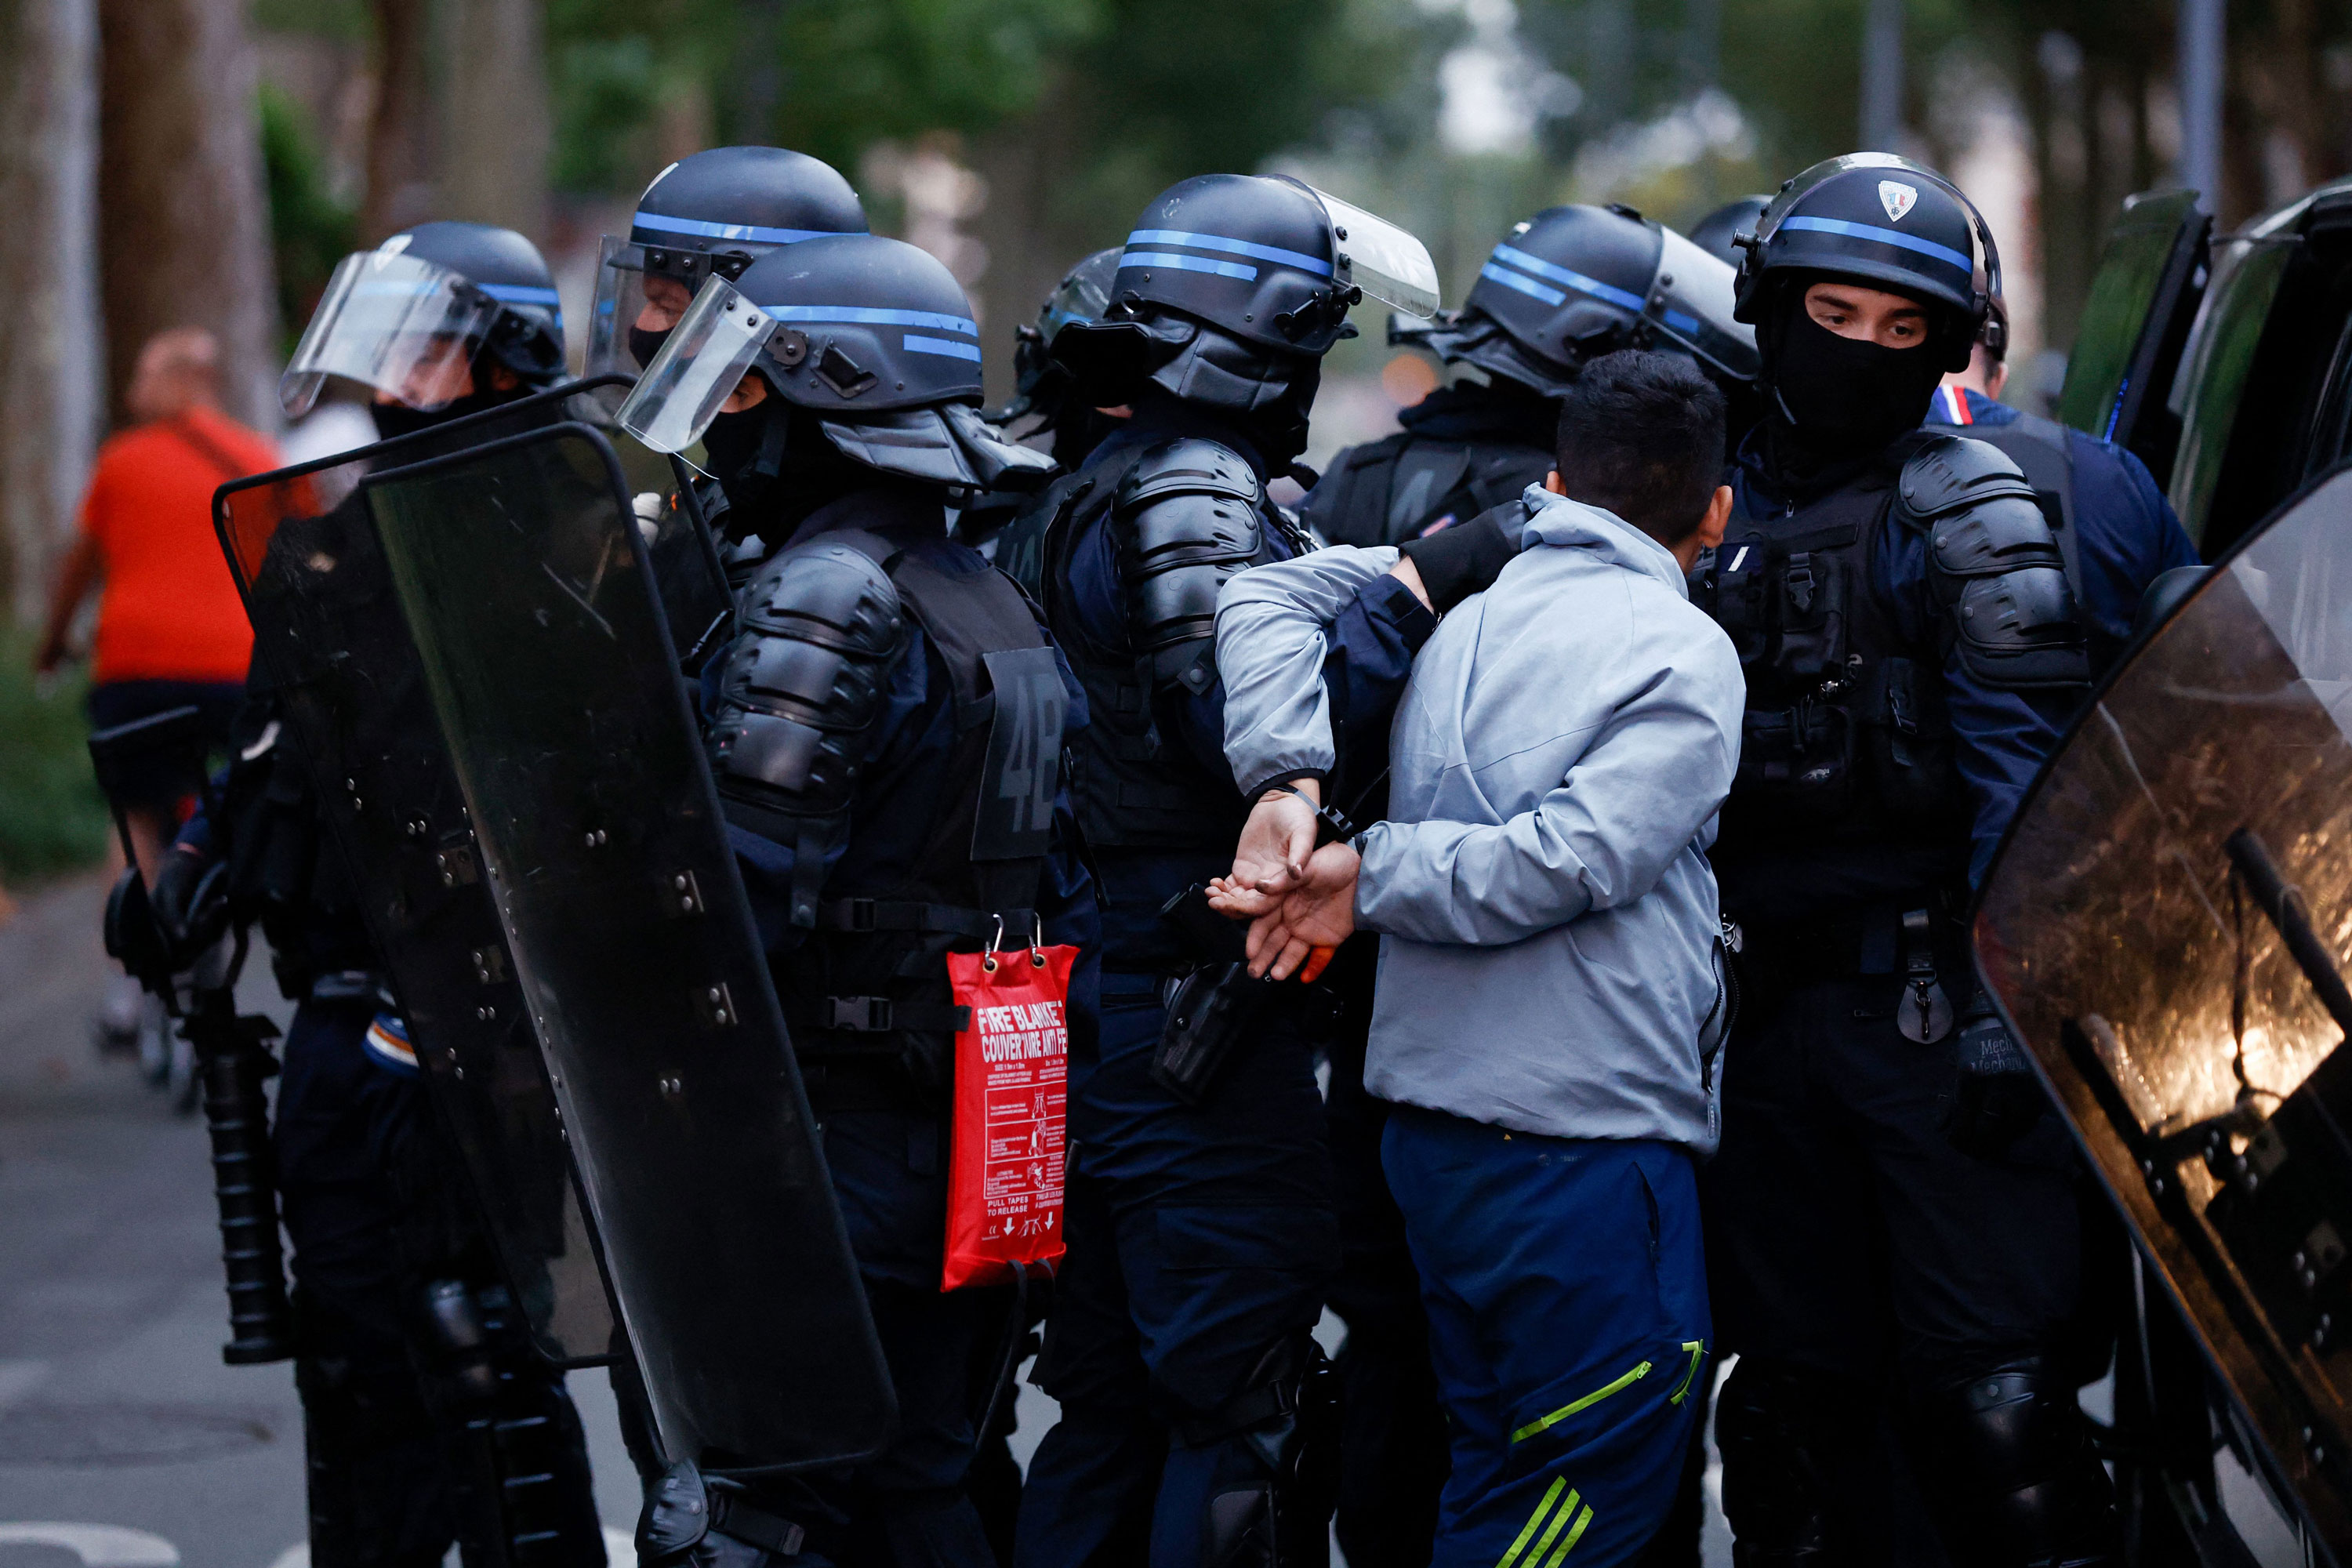 Police officers arrest a man during protests in Lille, northern France, on June 29.